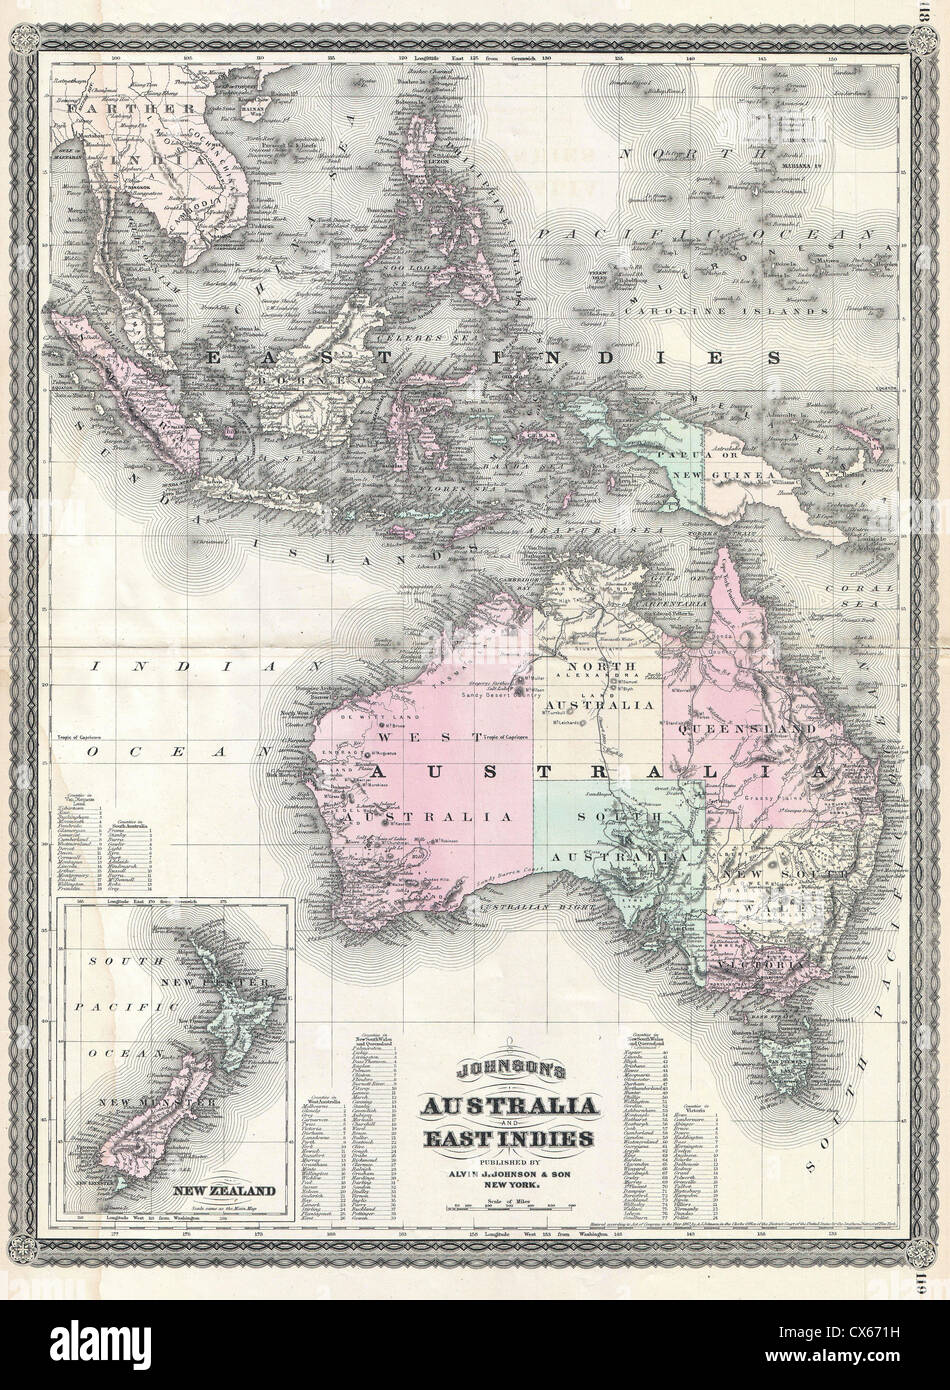 1870 Johnson Map of Australia, the East Indies, and Southeast Asia Stock Photo